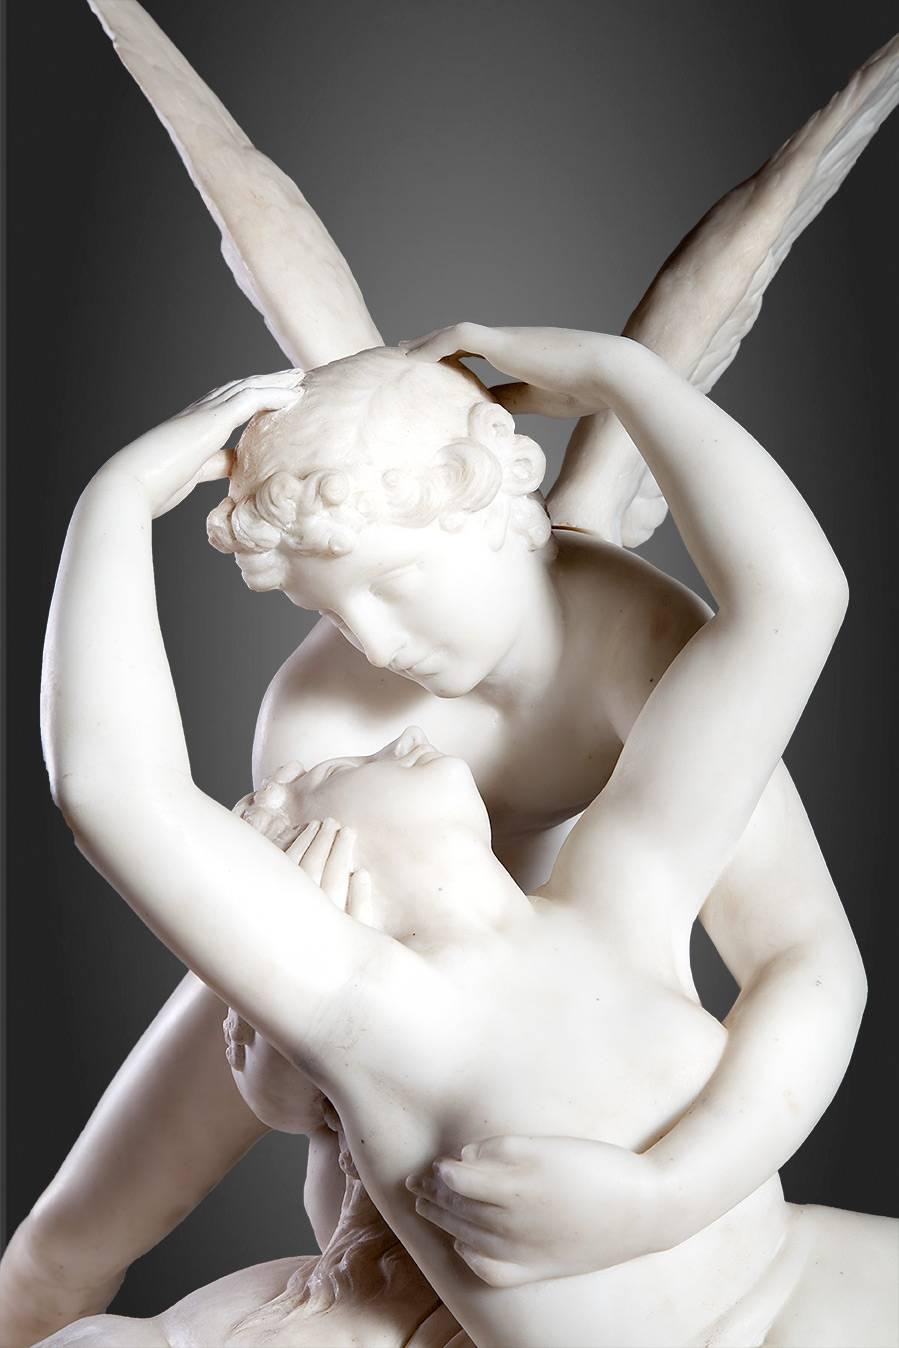 psyche revived by cupids kiss